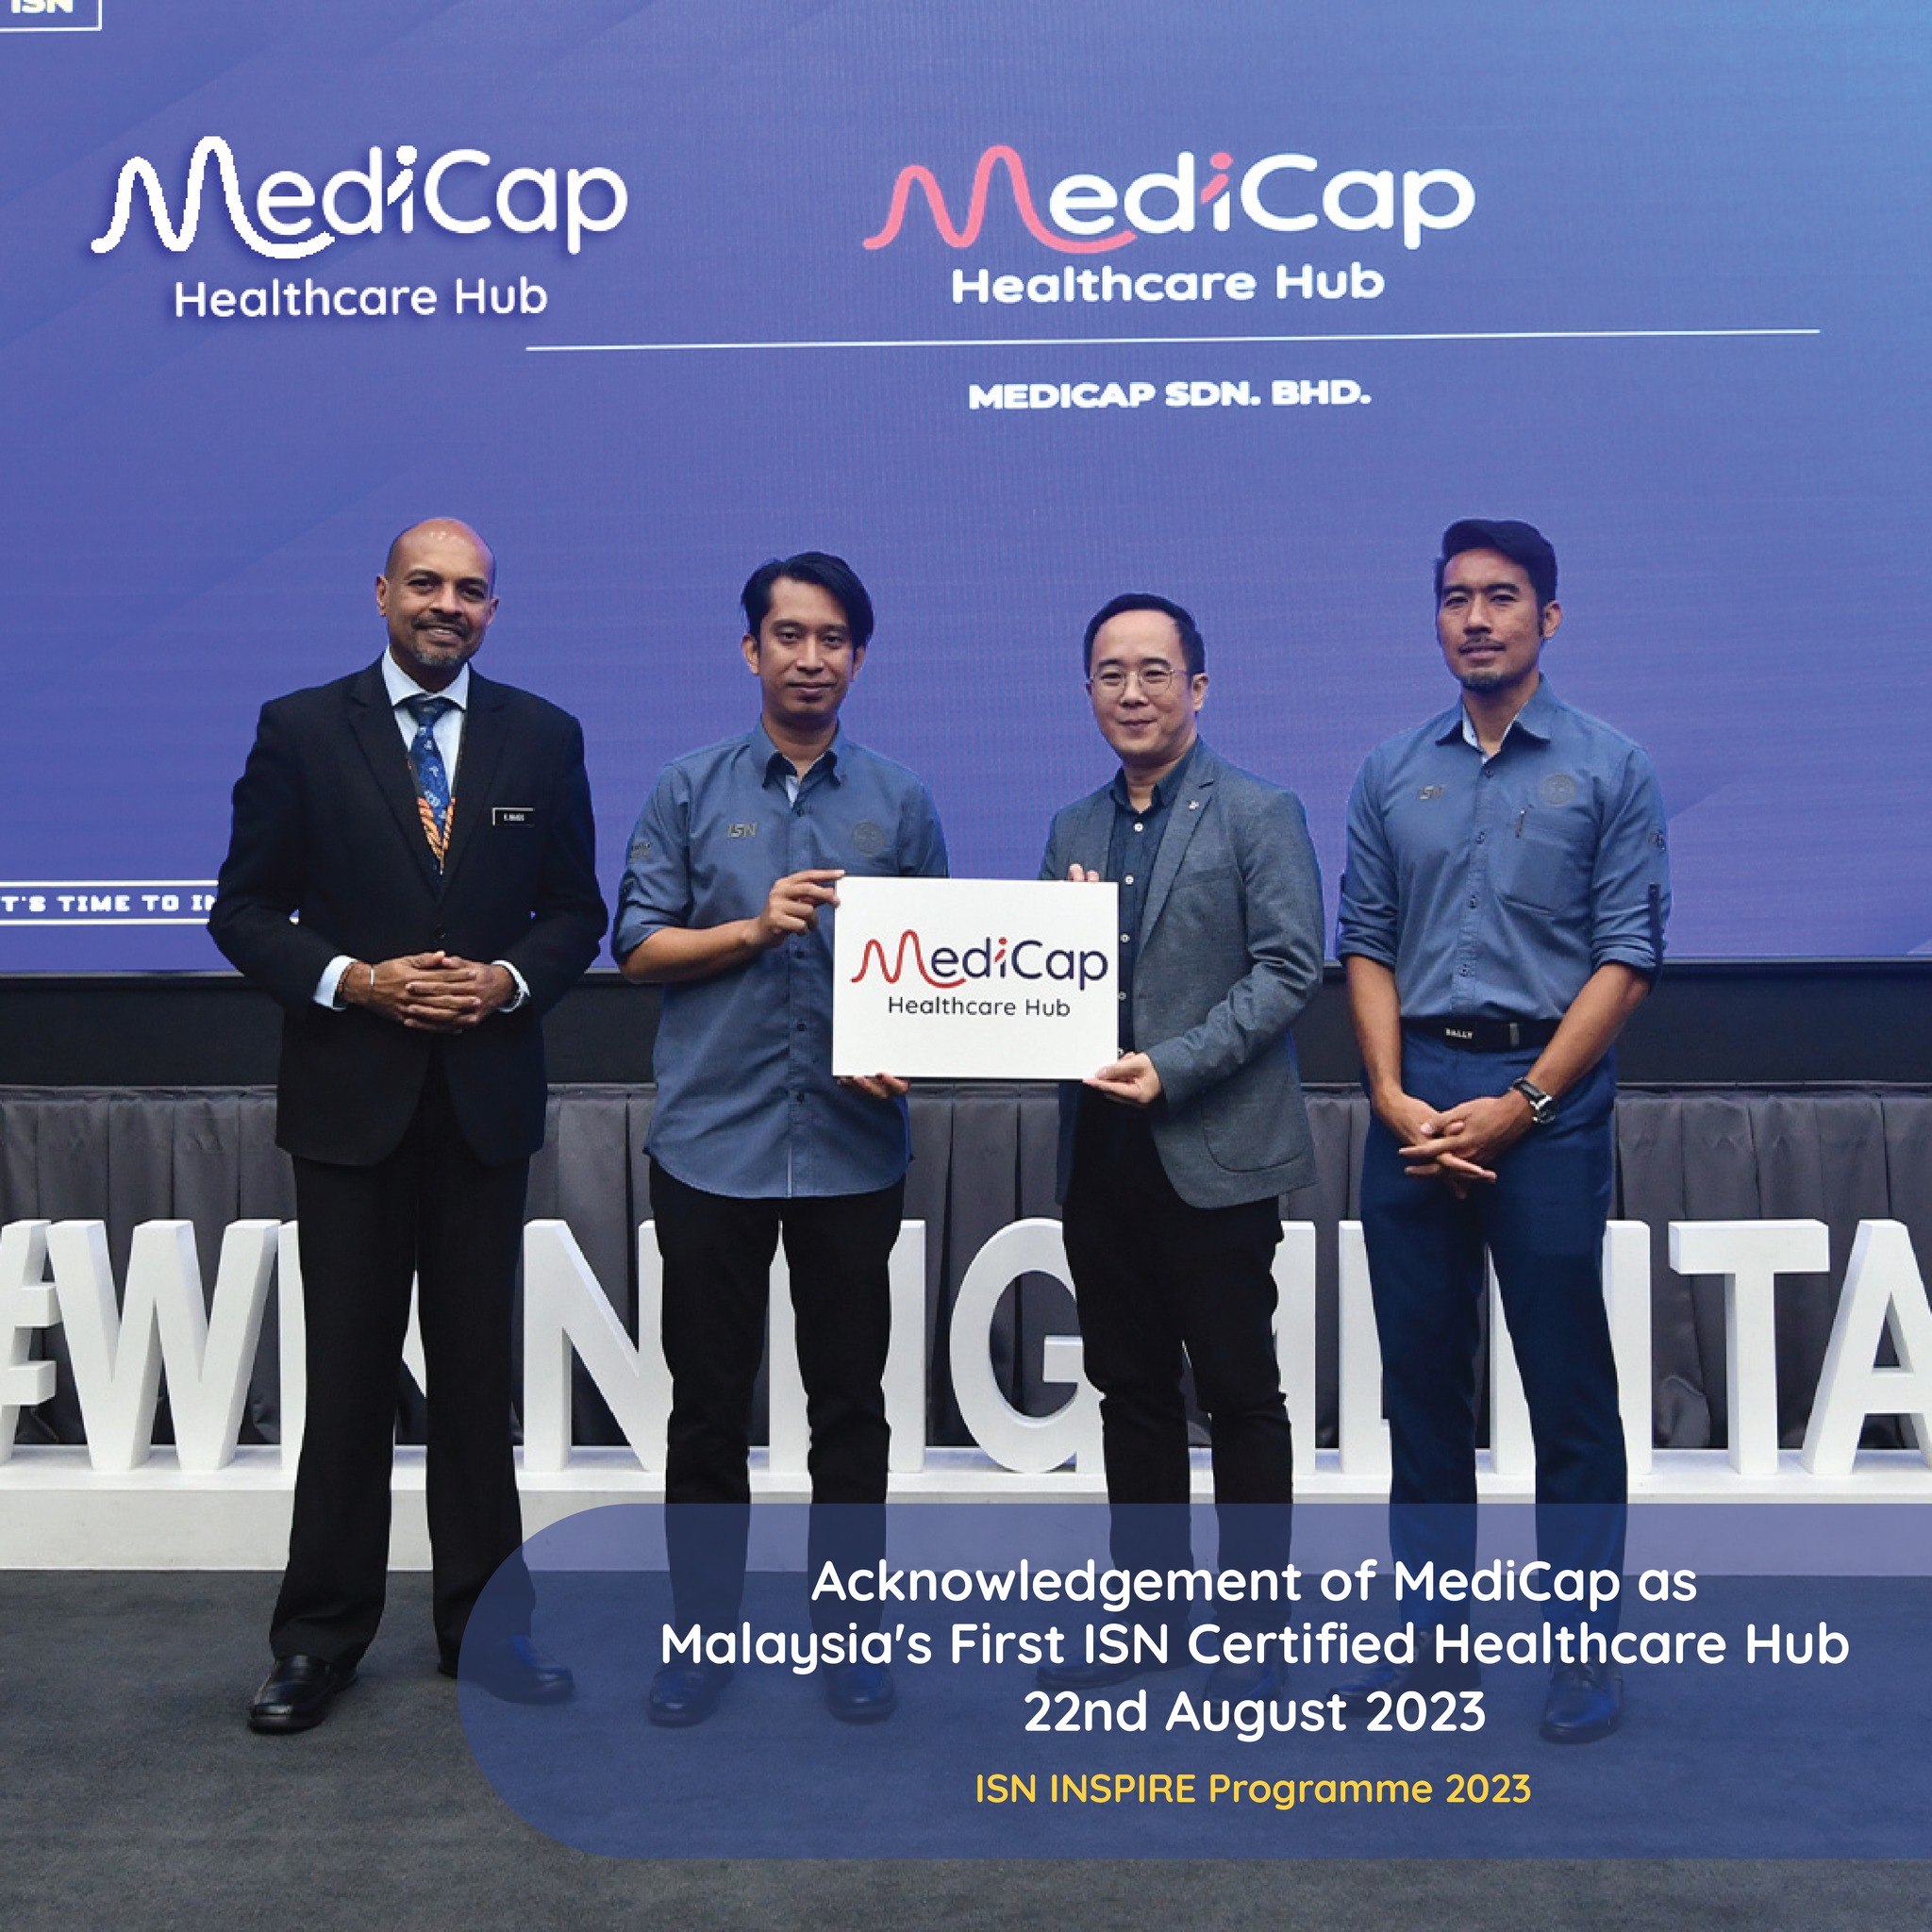 MediCap Healthcare Hub has achieved two outstanding accomplishments in the ISN INSPIRE programme